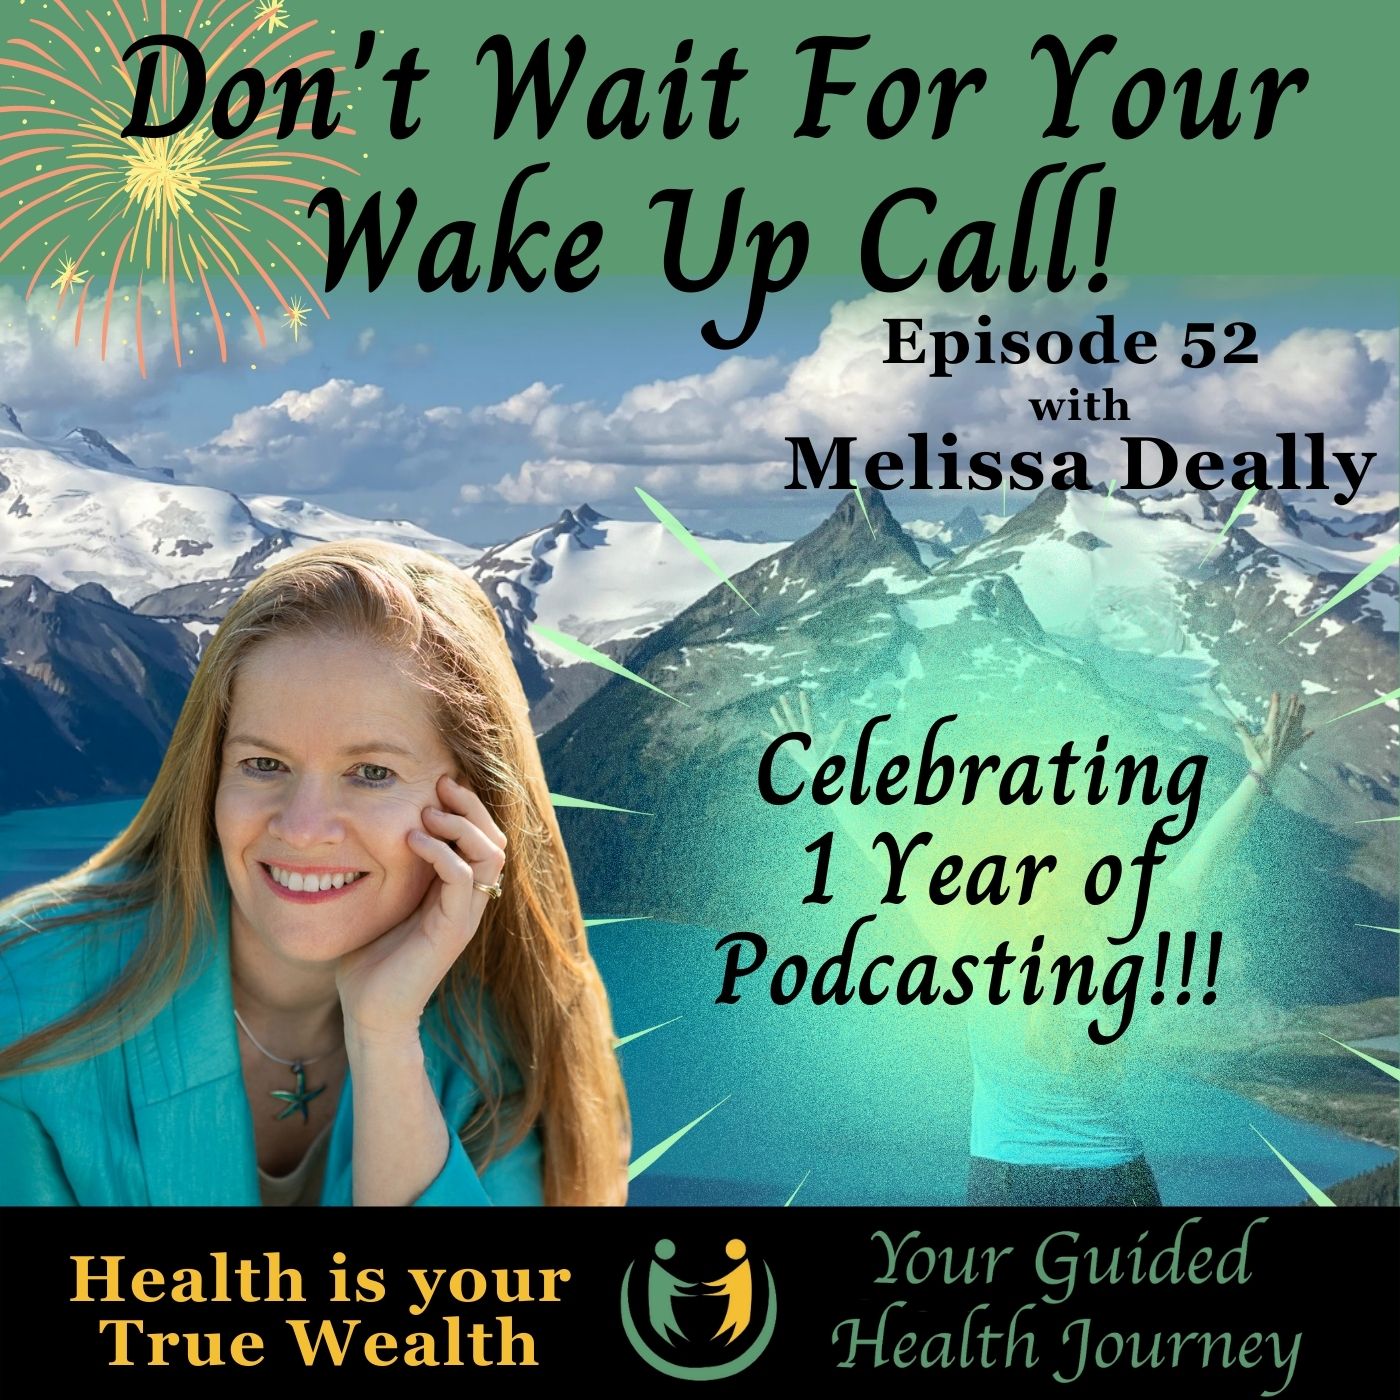 Artwork for podcast Don't Wait For Your Wake Up Call!